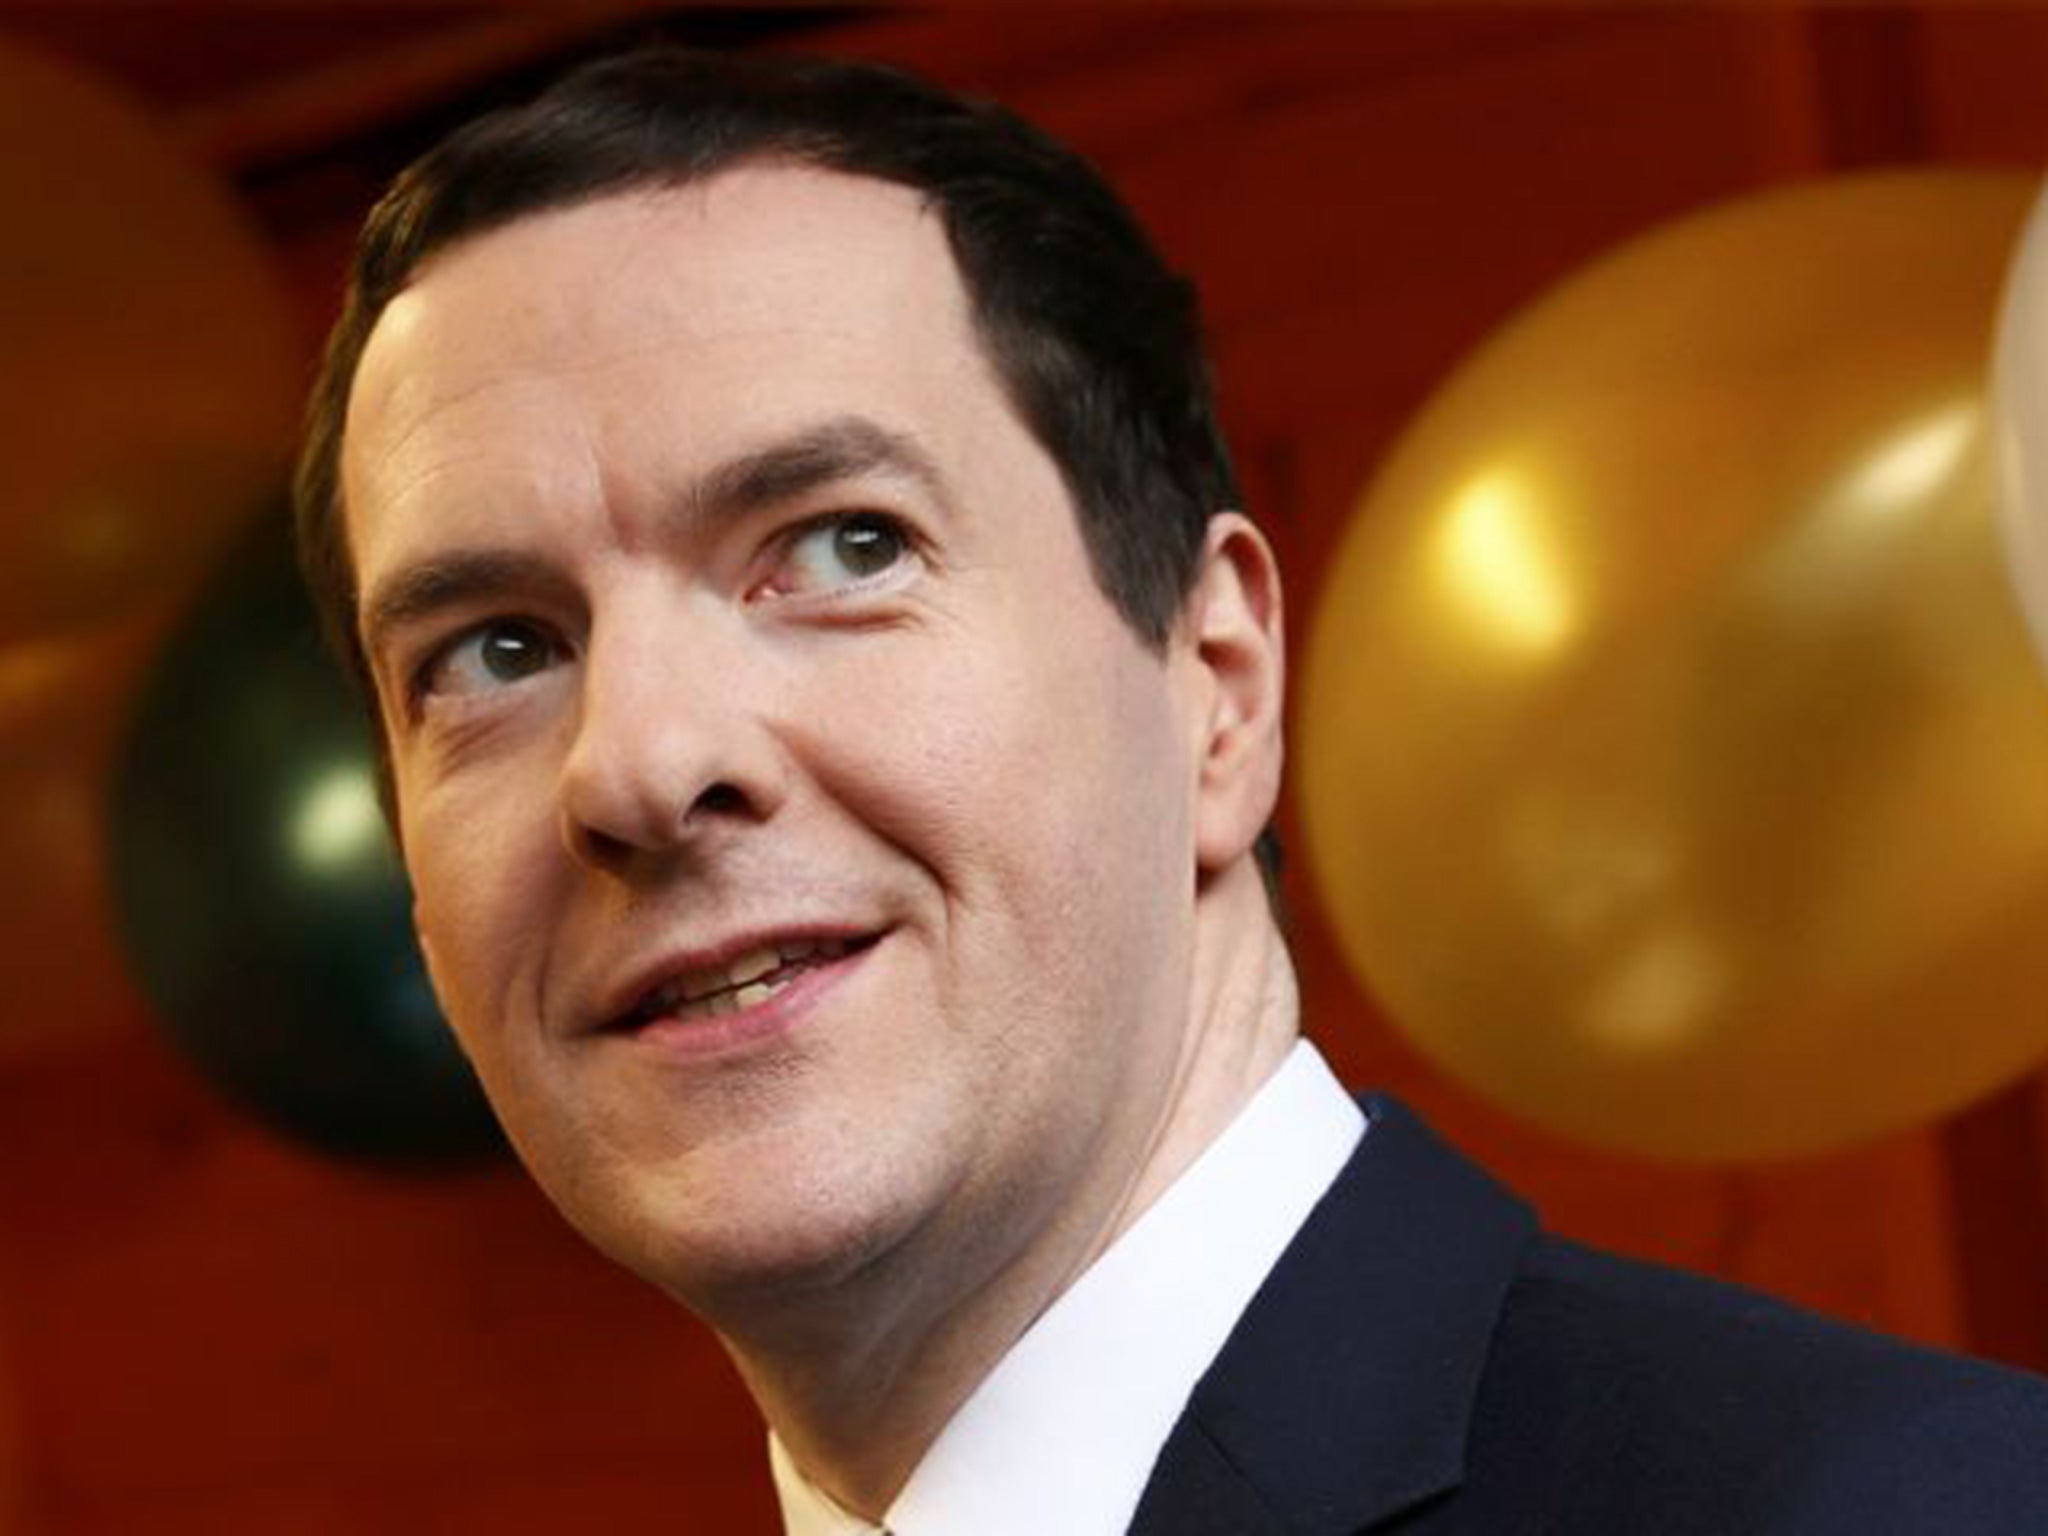 Chancellor of the Exchequer George Osborne during a tour of the Small Business Saturday Christmas Fair at the Treasury